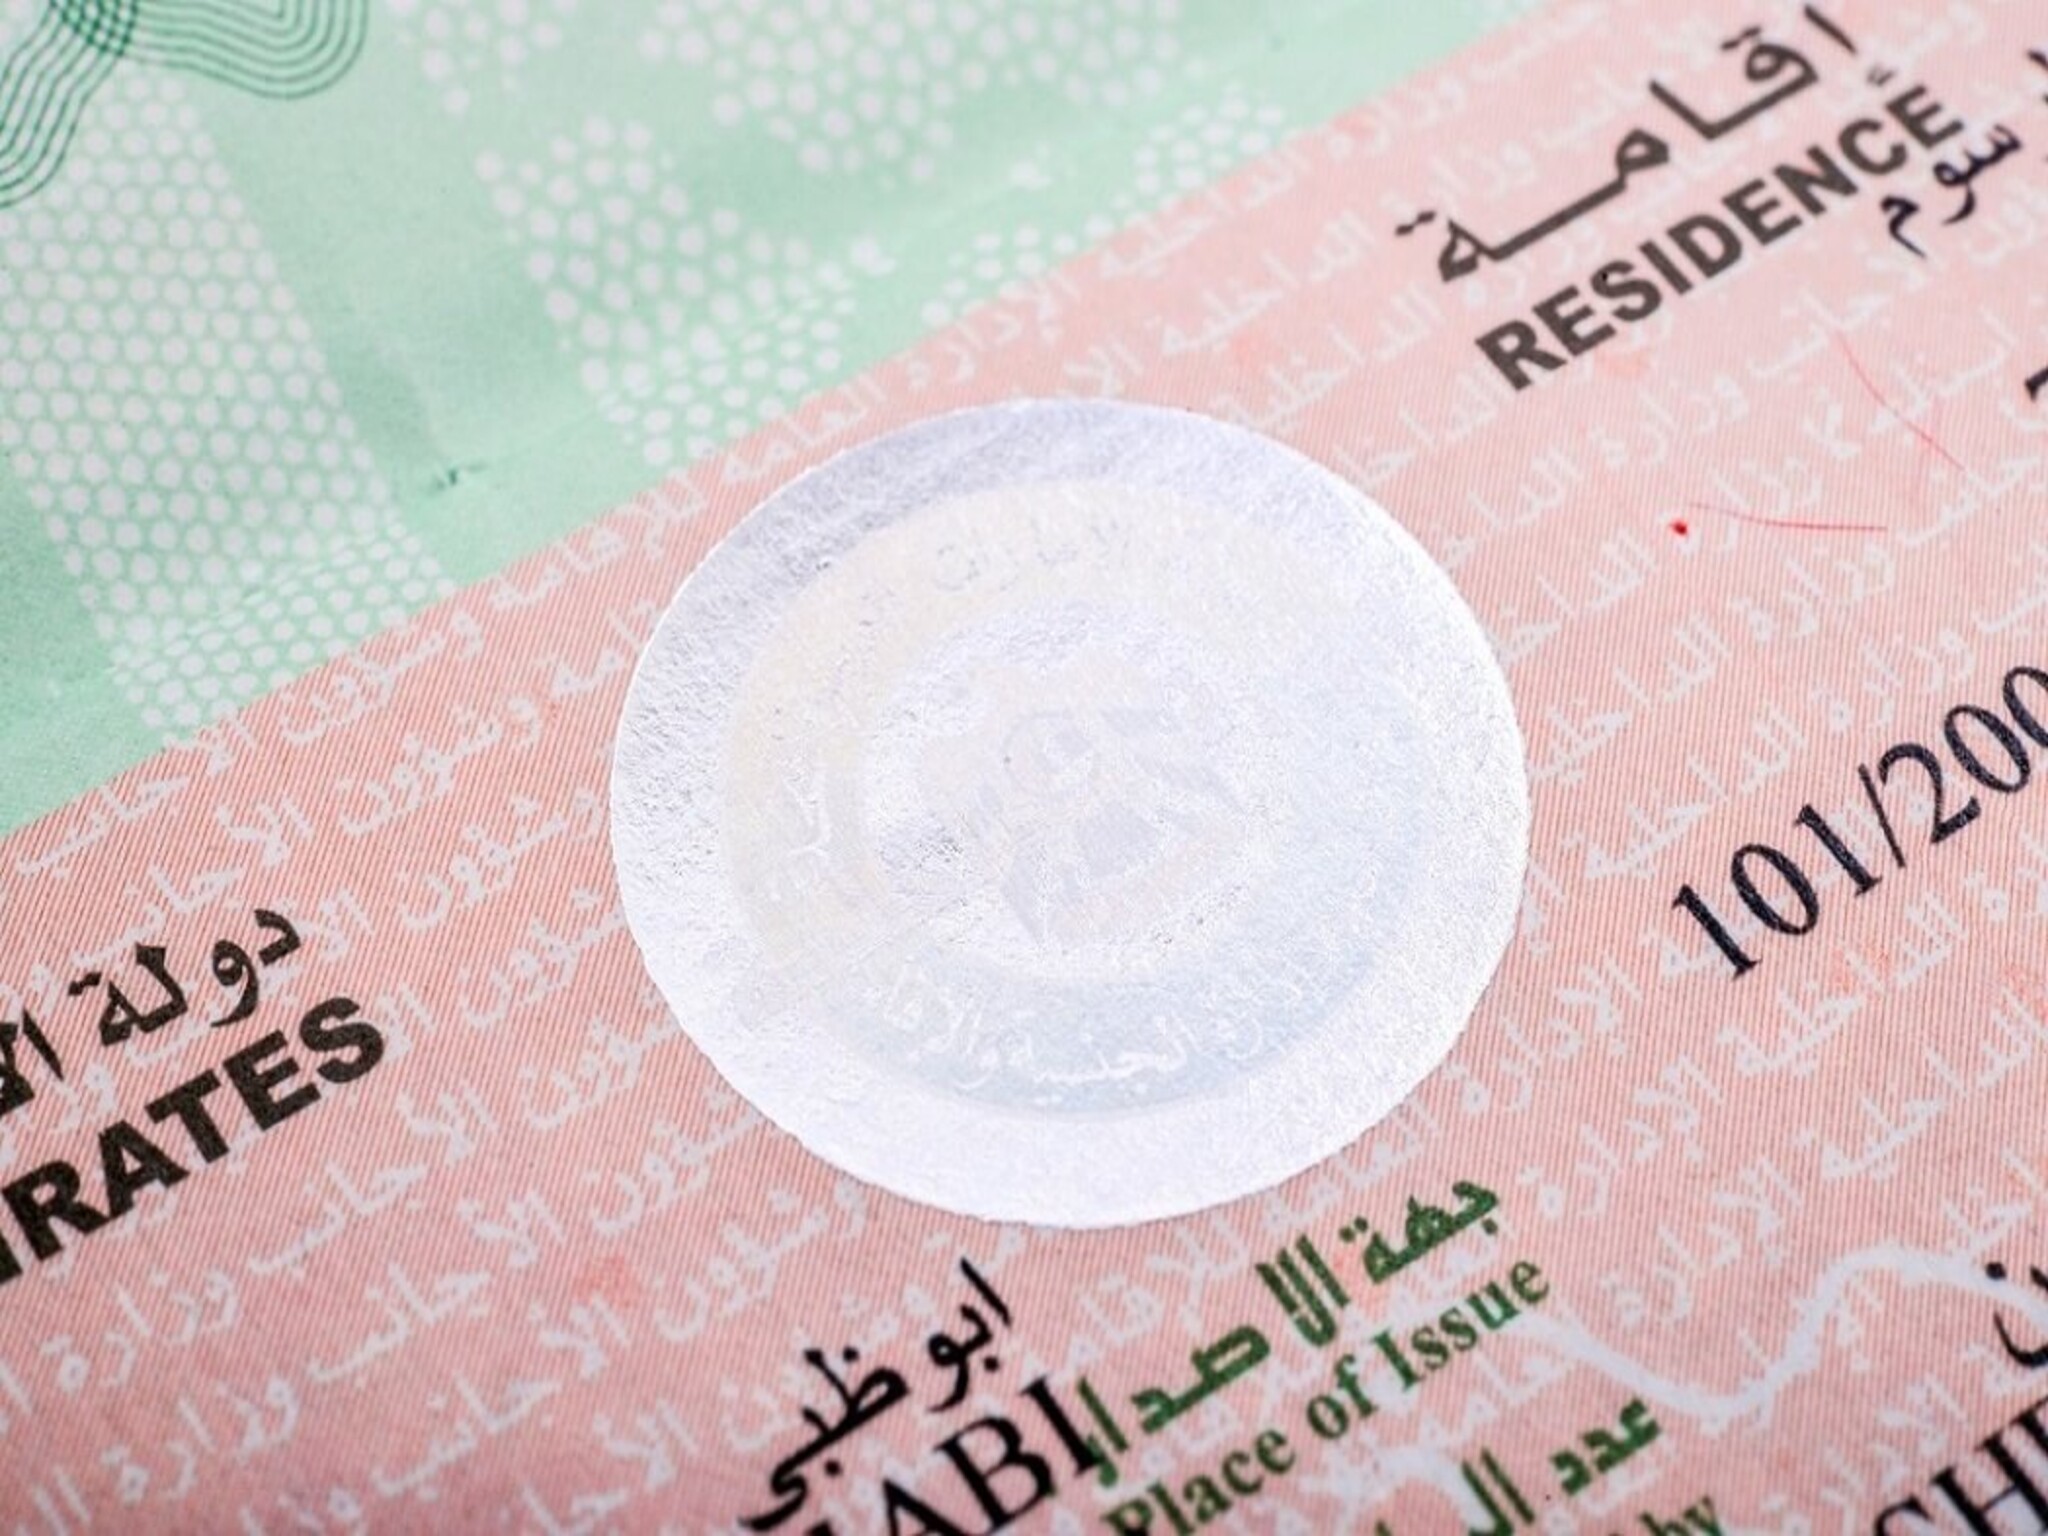 The UAE issues a decision regarding obtaining a residence permit, entry visa, or tourist visa